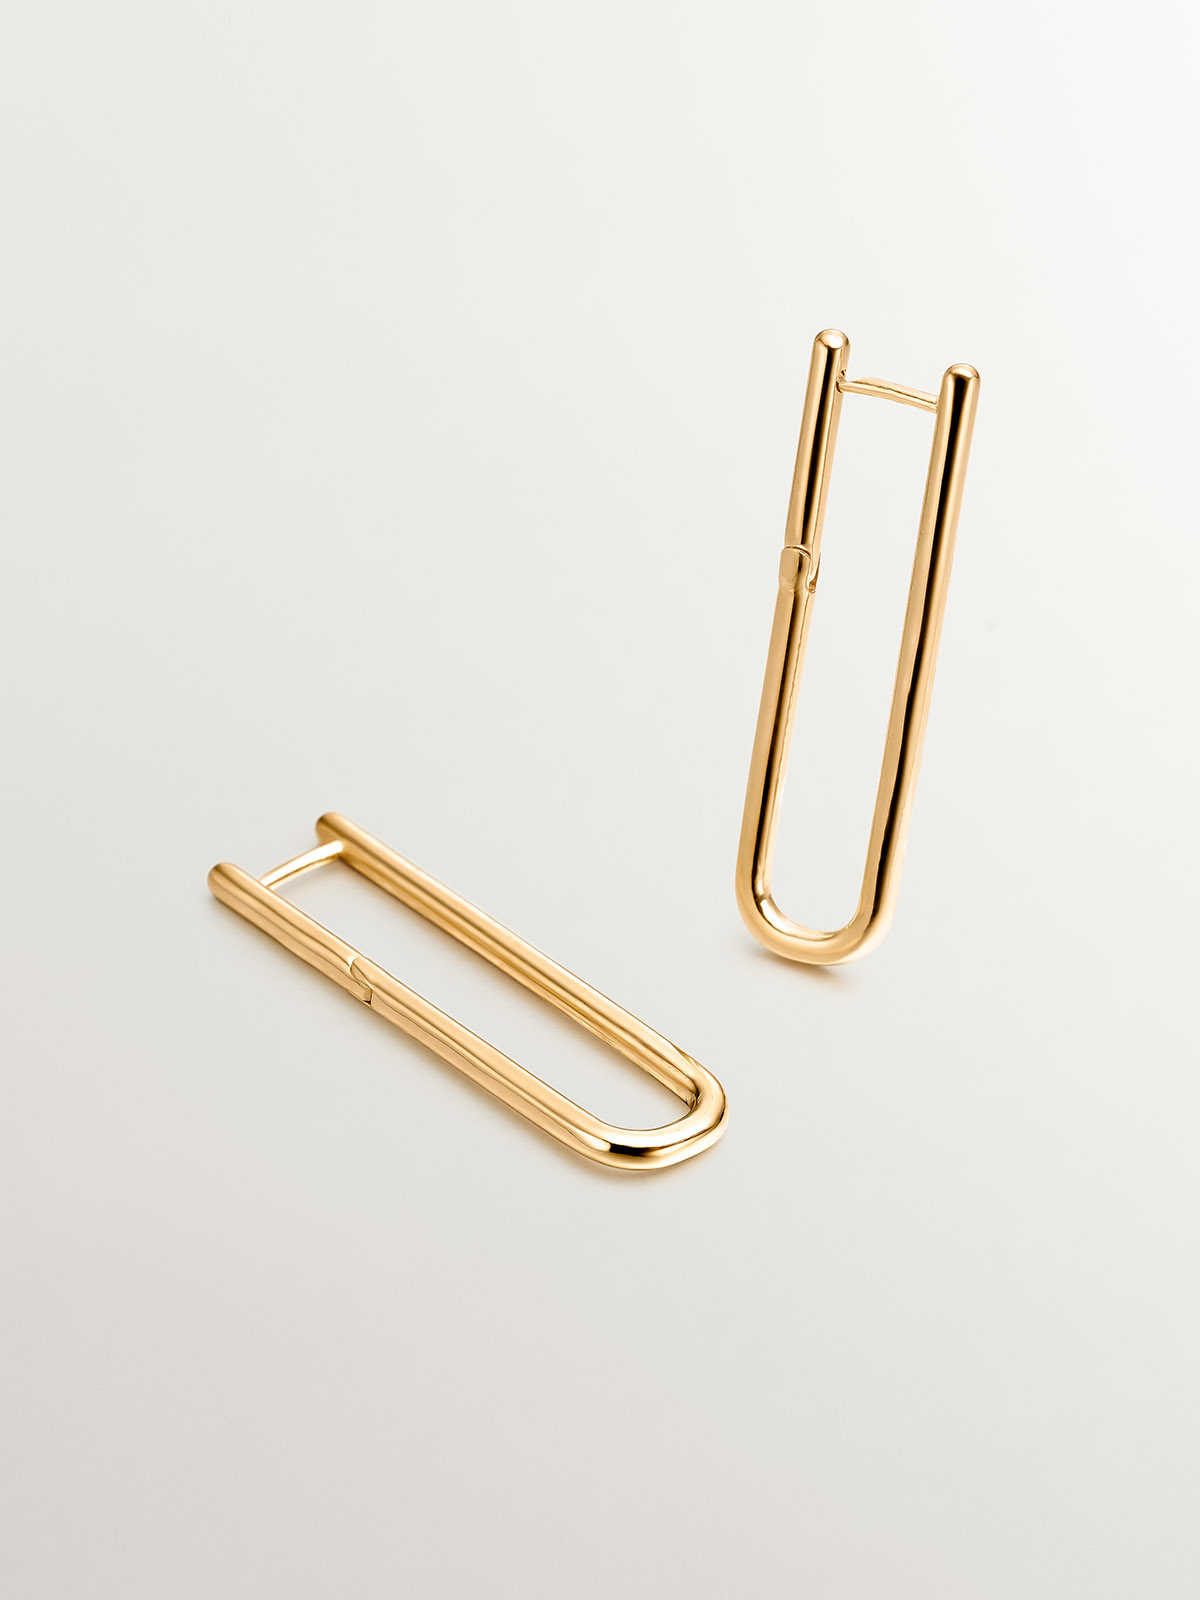 925 extra -bathed extra yellow gold ring earrings in 18k yellow